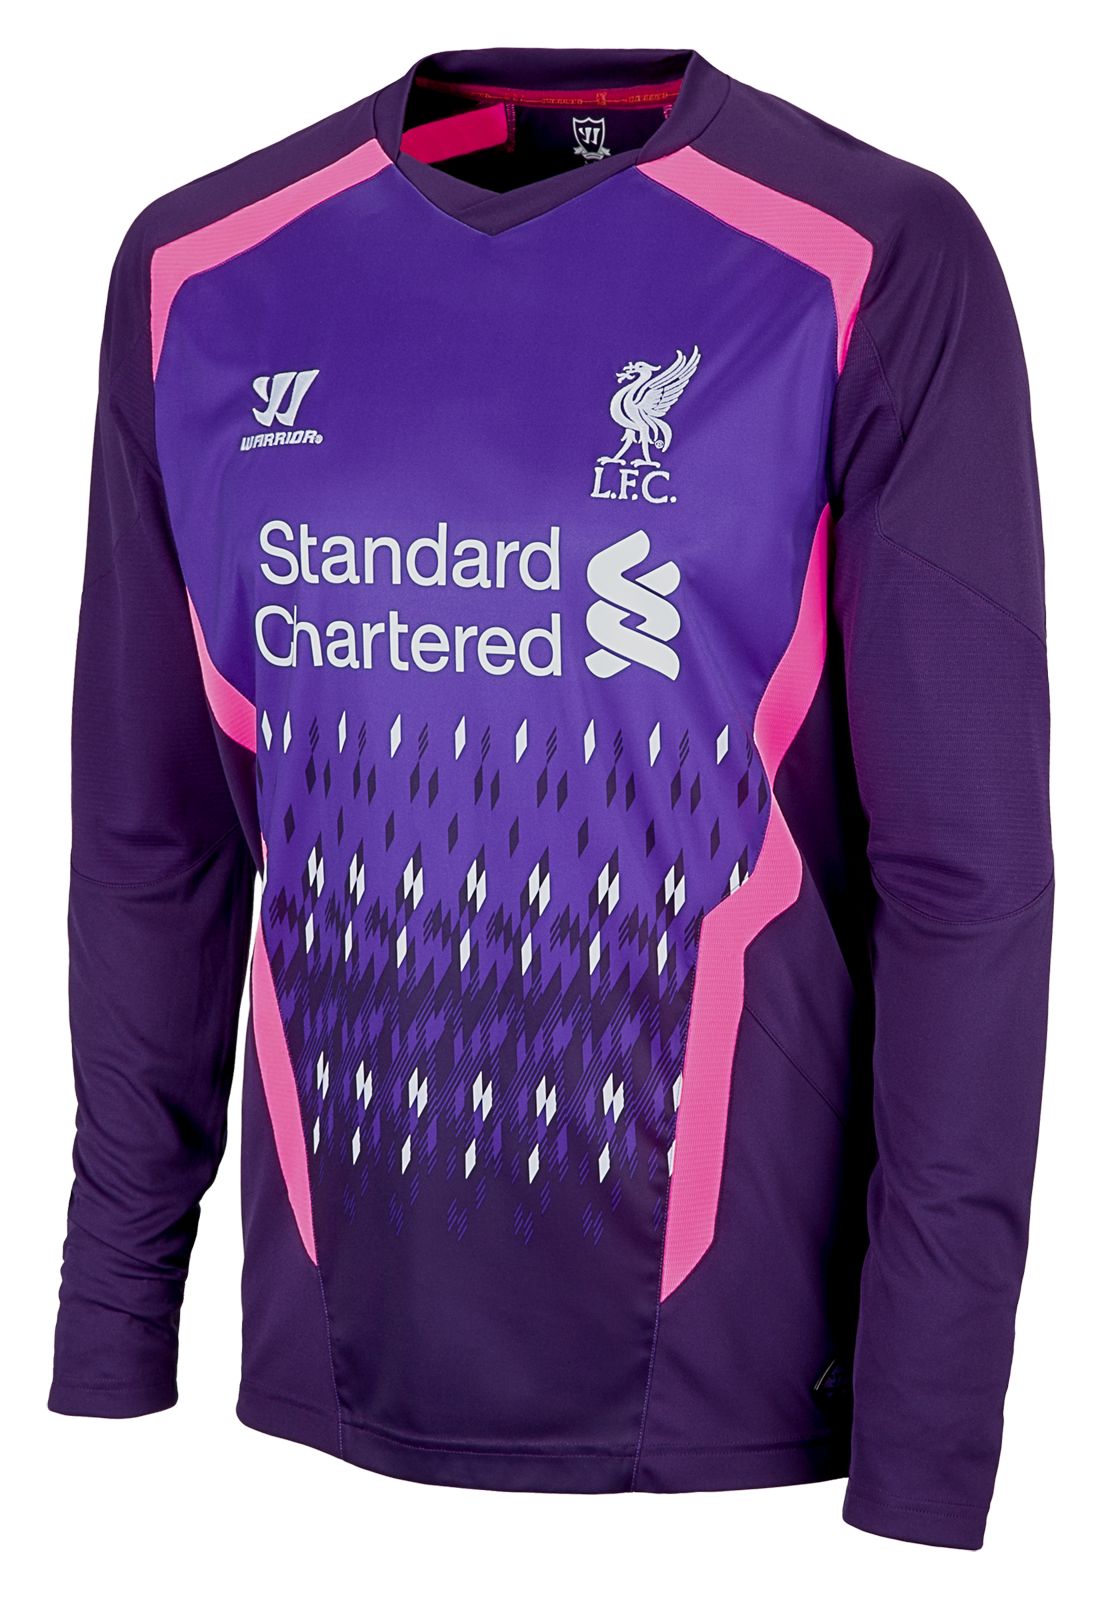 Liverpool Away Goalkeeper LS Jersey 2013/14, Blackberry Cord with Prism Violet & Fluorescent Pink image number 1